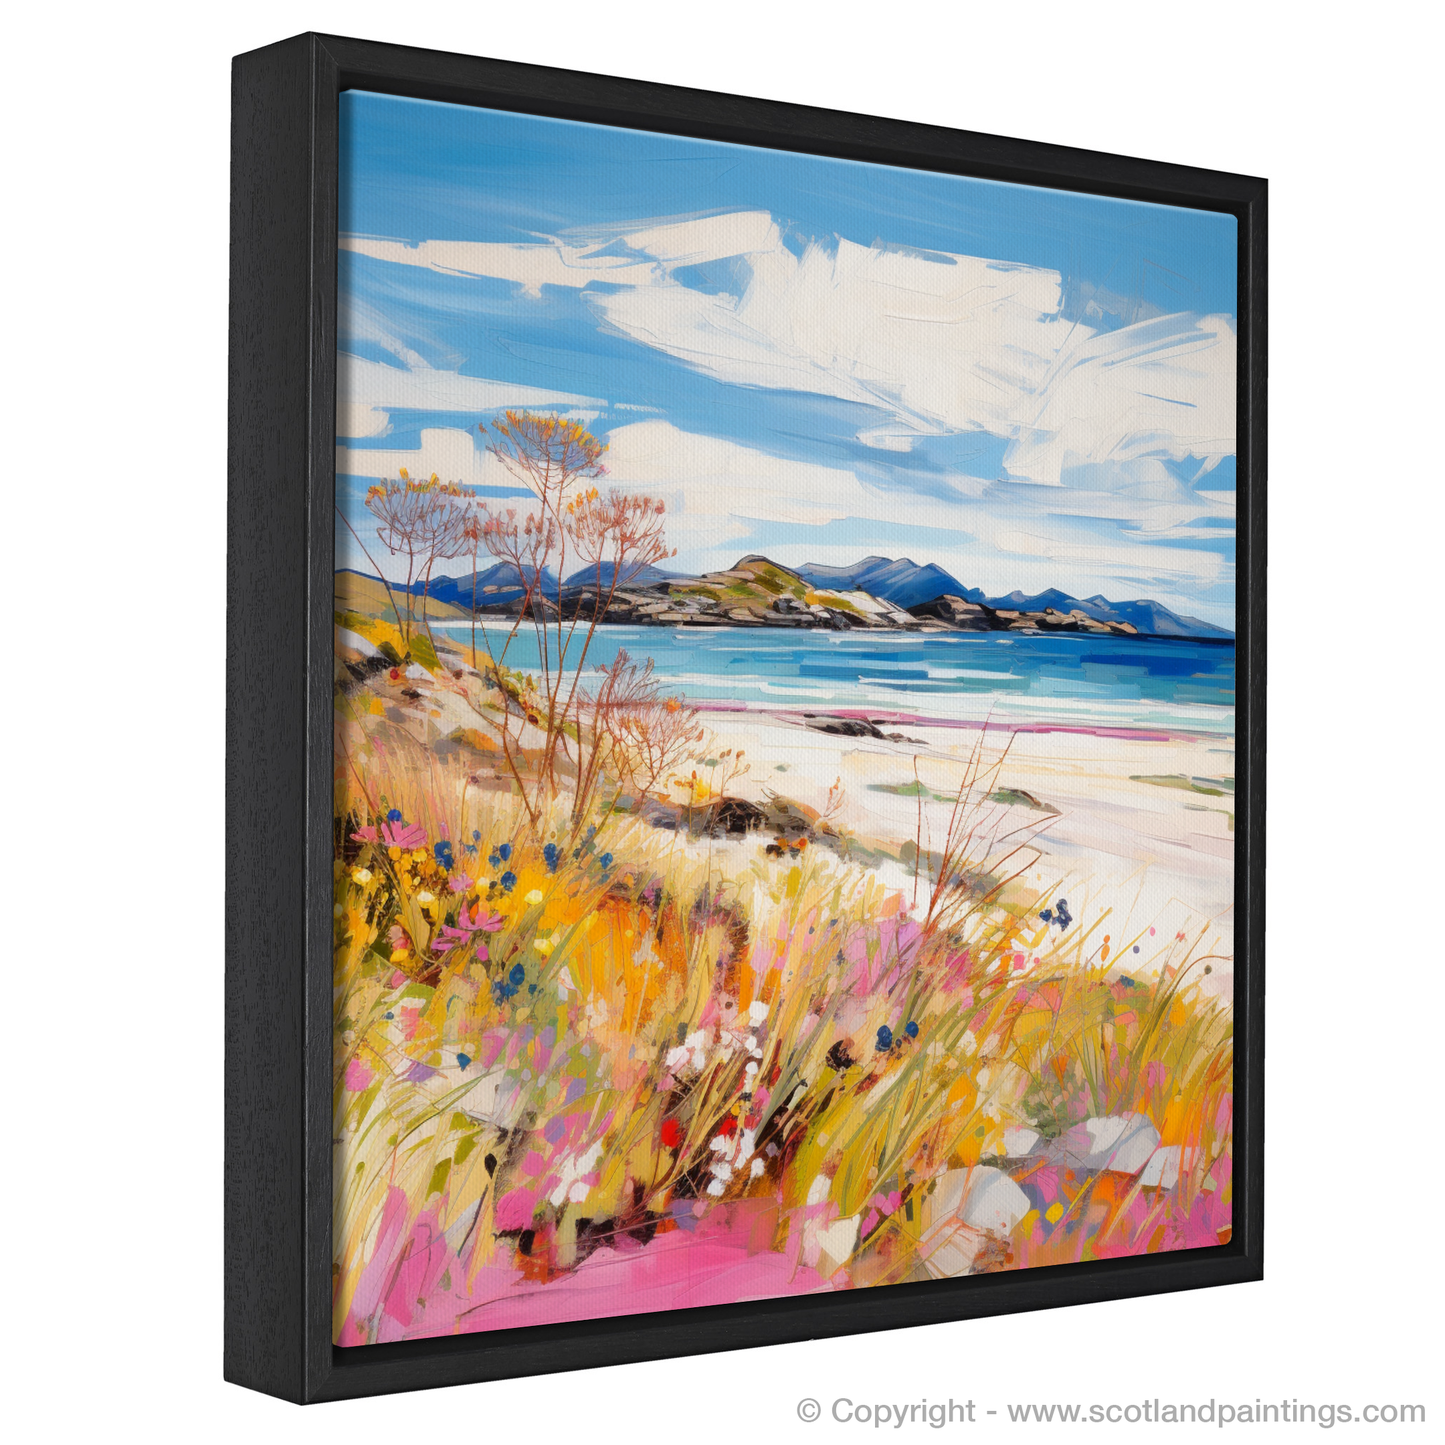 Painting and Art Print of Camusdarach Beach near Arisaig entitled "Wildflowers and Waves: A Contemporary Homage to Camusdarach Beach".